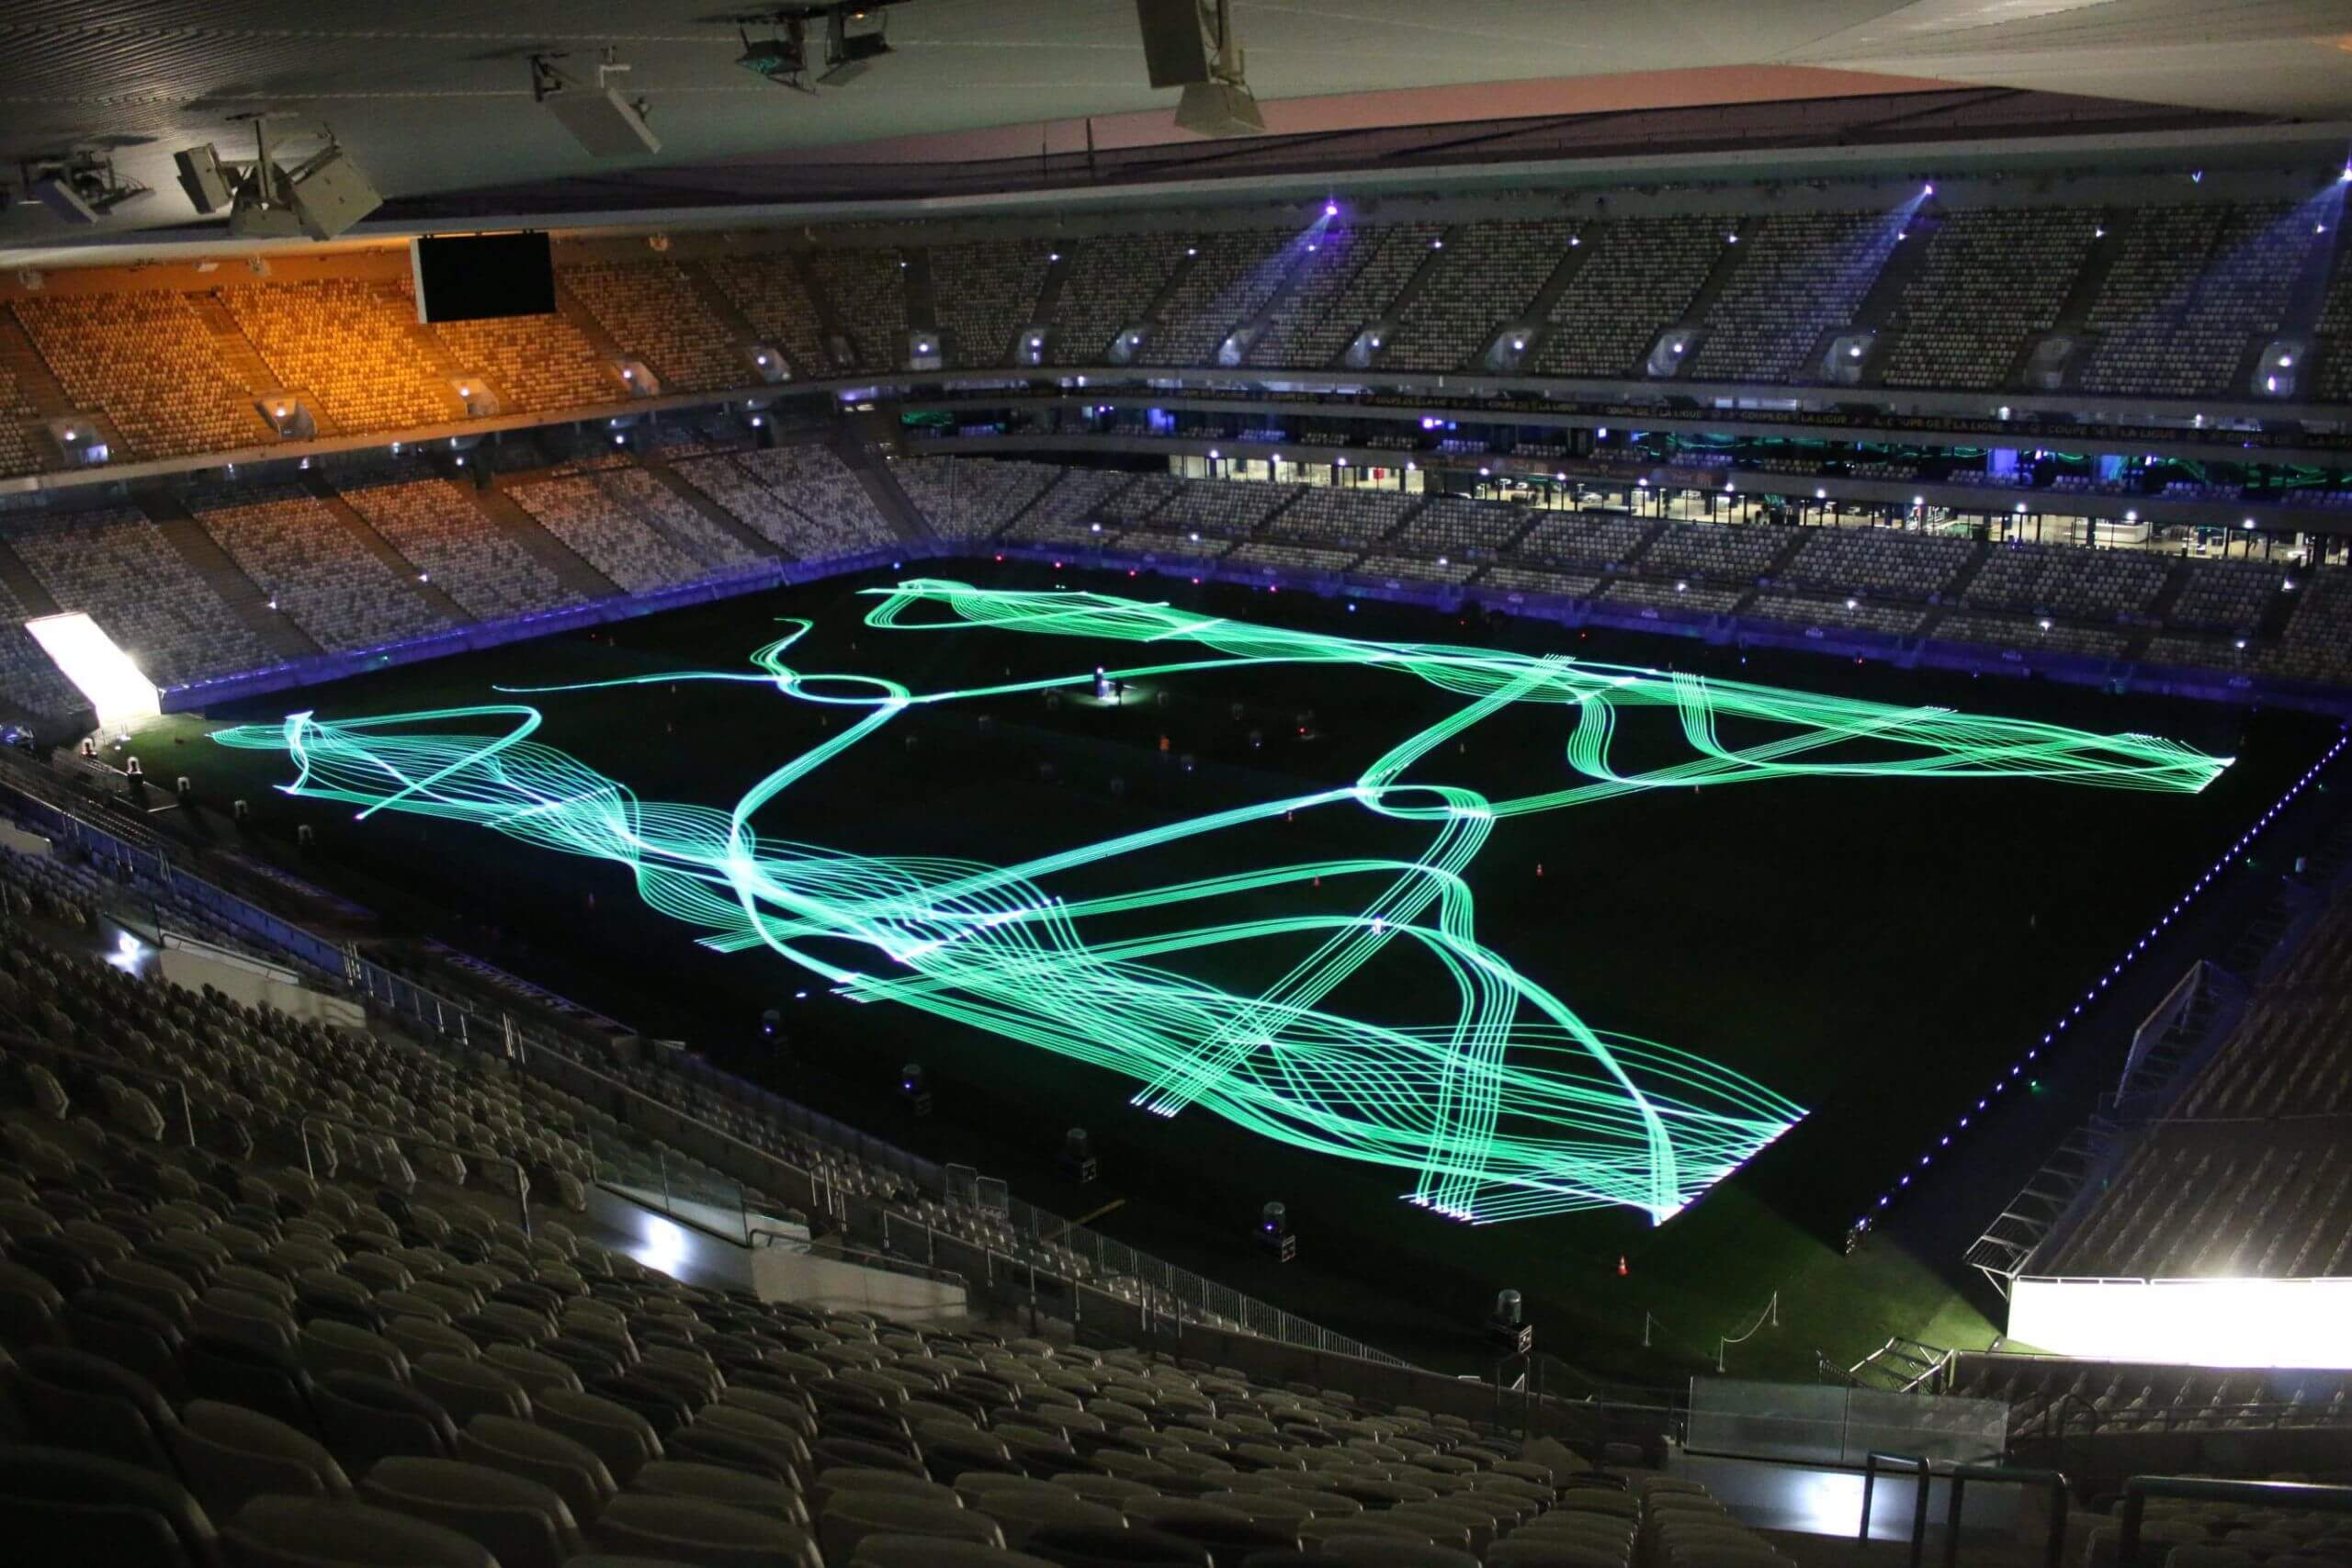 Europe Évènement - Photo of a stadium with green laser shapes projected on it during the 2018 league cup final